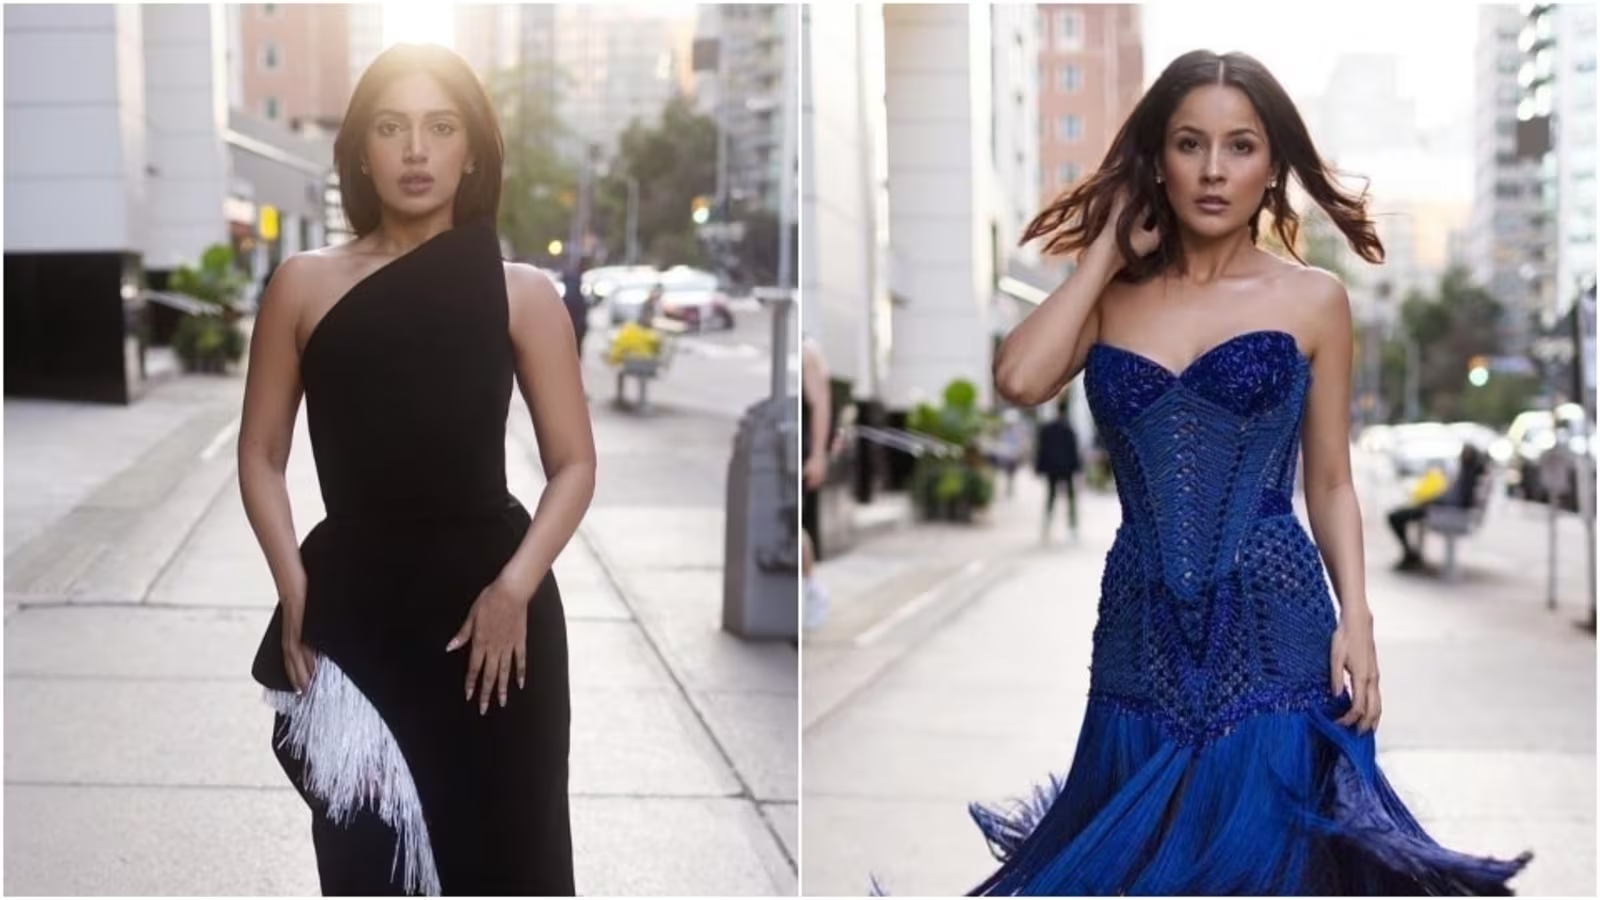  Bhumi Pednekar and Shehnaaz Gill Grace the thoroughfares of Toronto in Stunning Outfits    